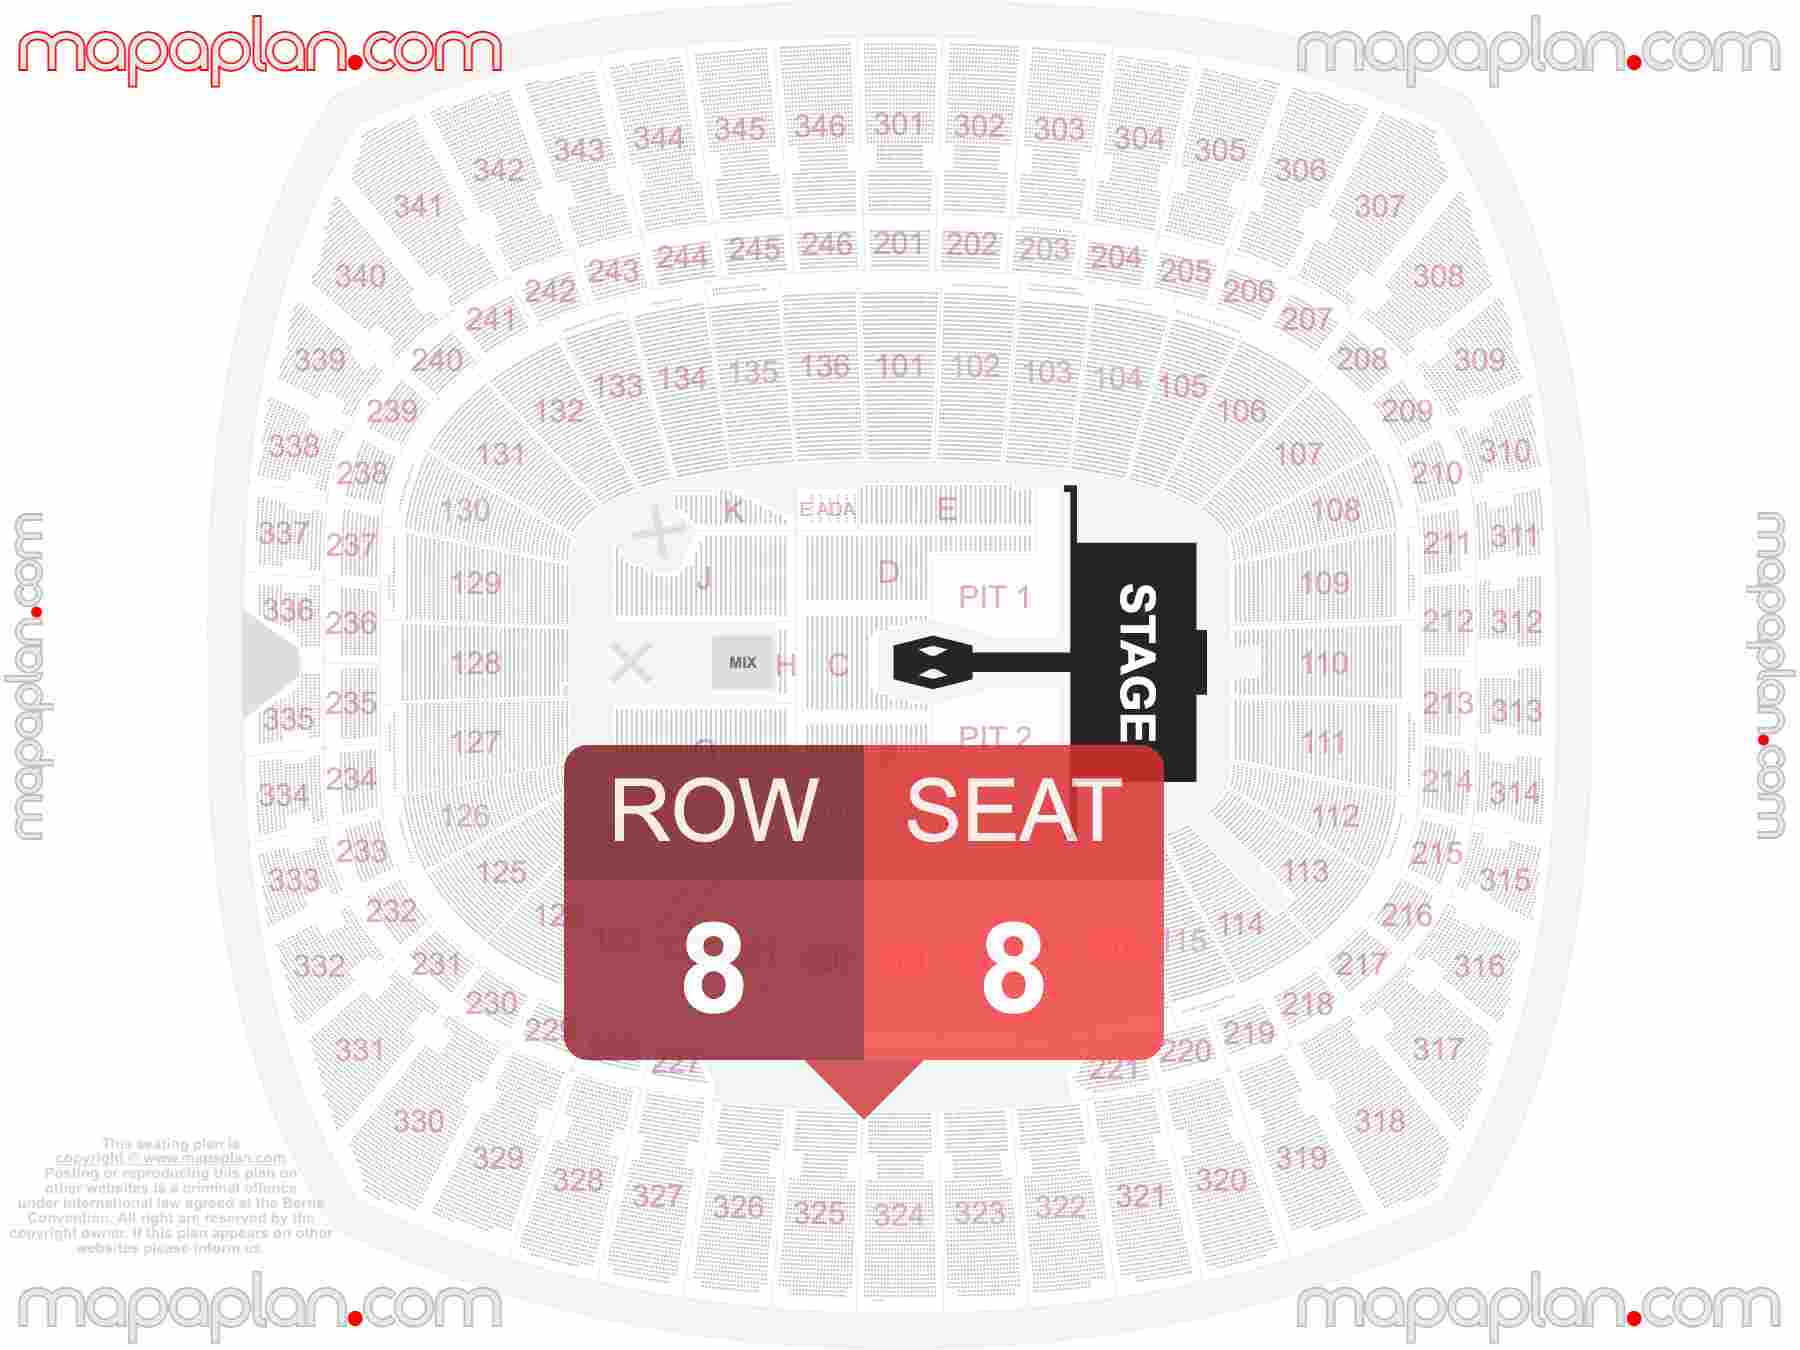 Kansas City GEHA Field Arrowhead Stadium seating chart Concert with extended catwalk runway B-stage & floor general admission PIT standing  seating chart with exact section numbers showing best rows and seats selection 3d layout - Best interactive seat finder tool with precise detailed location data